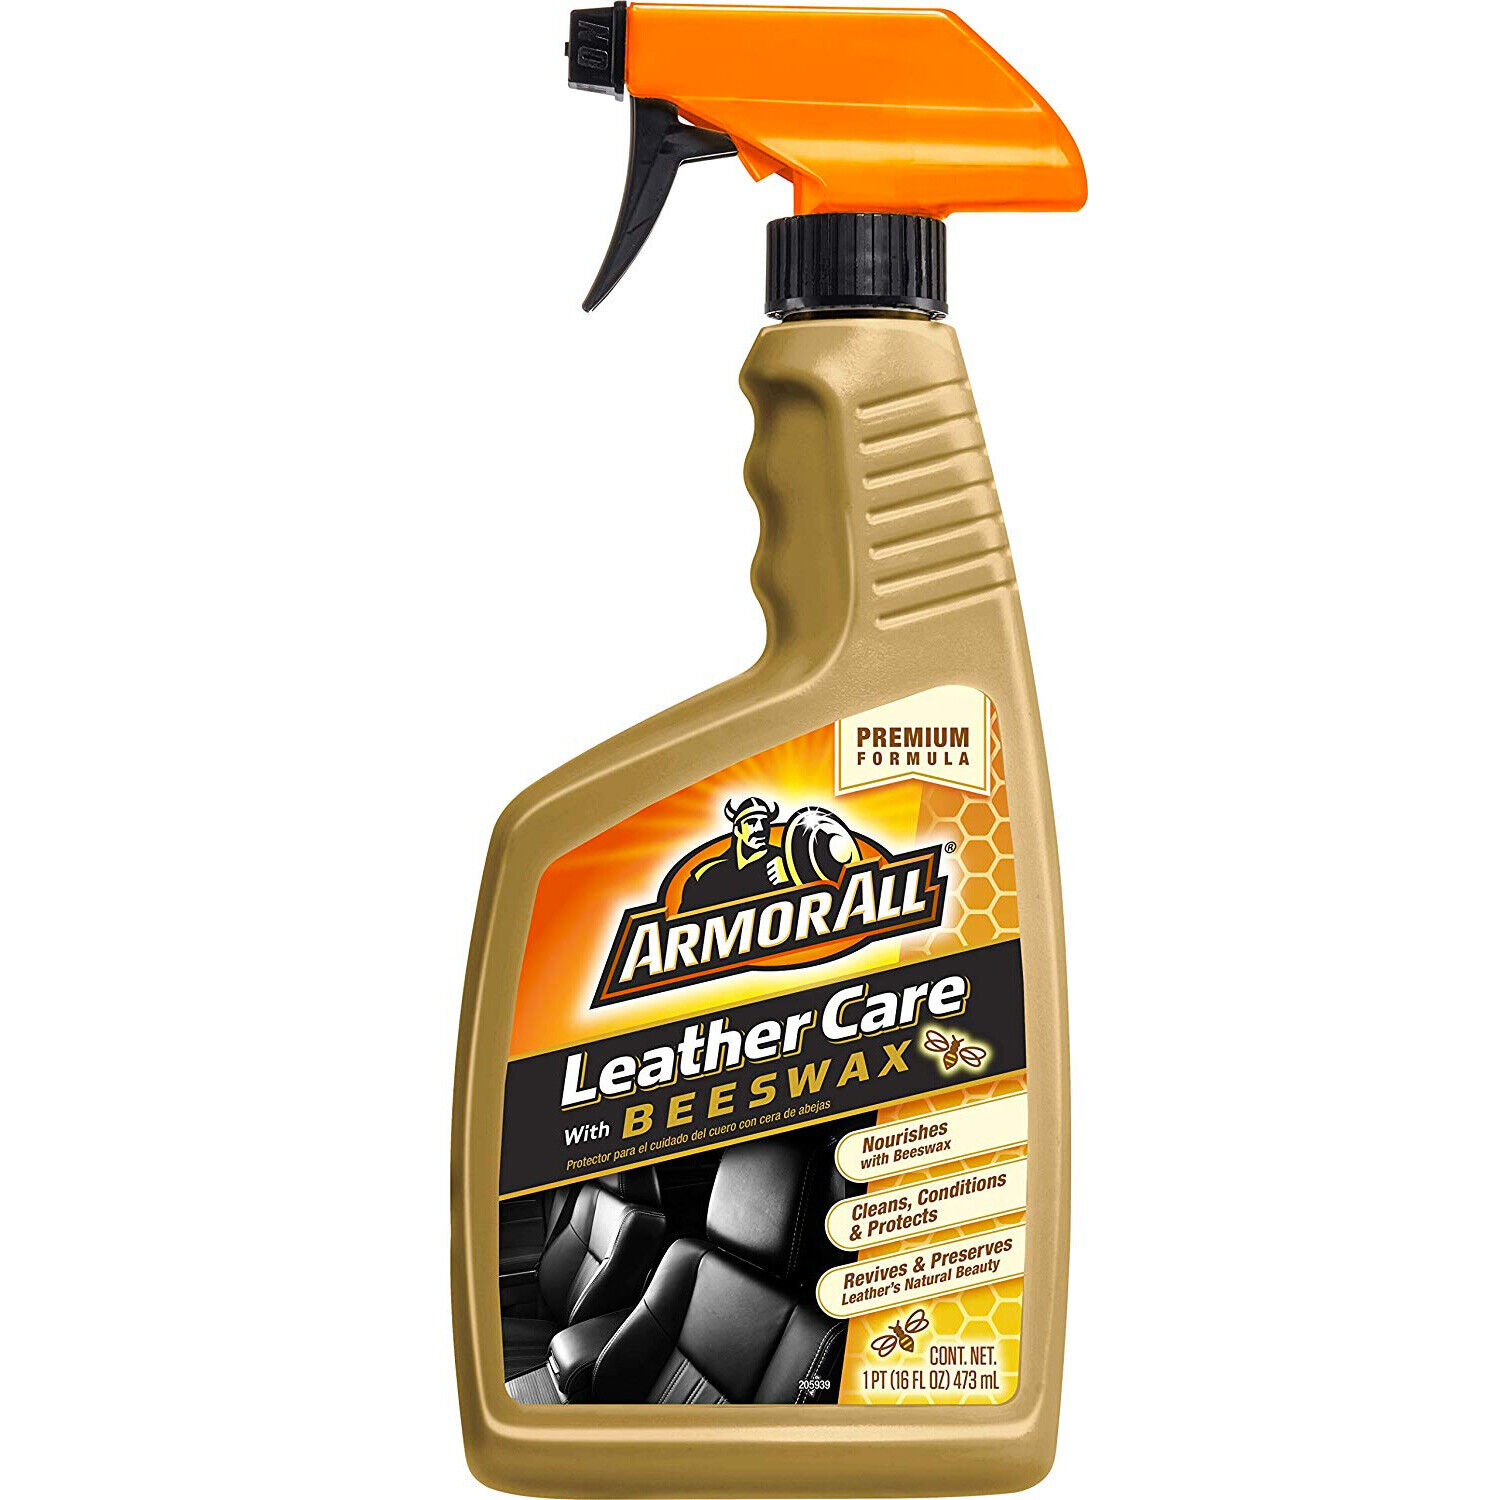 Armor All Leather Care with Beeswax, 16 fl. Oz. Trigger Spray